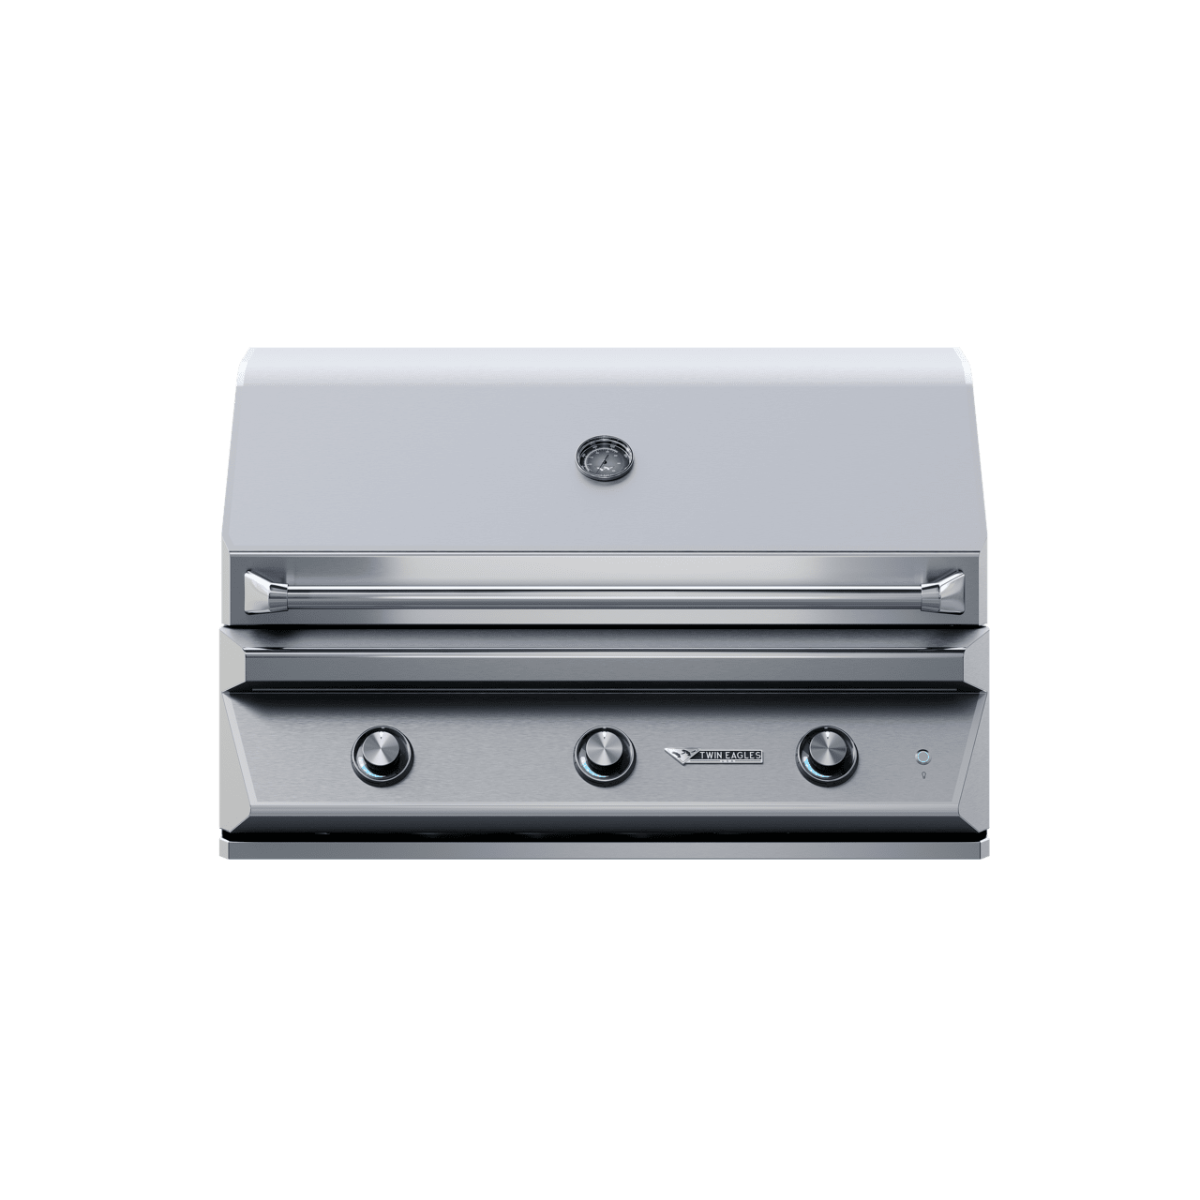 Front view of a 42-inch Twin Eagles gas grill with a closed lid. The stainless steel grill features three control knobs and a temperature gauge on the lid.